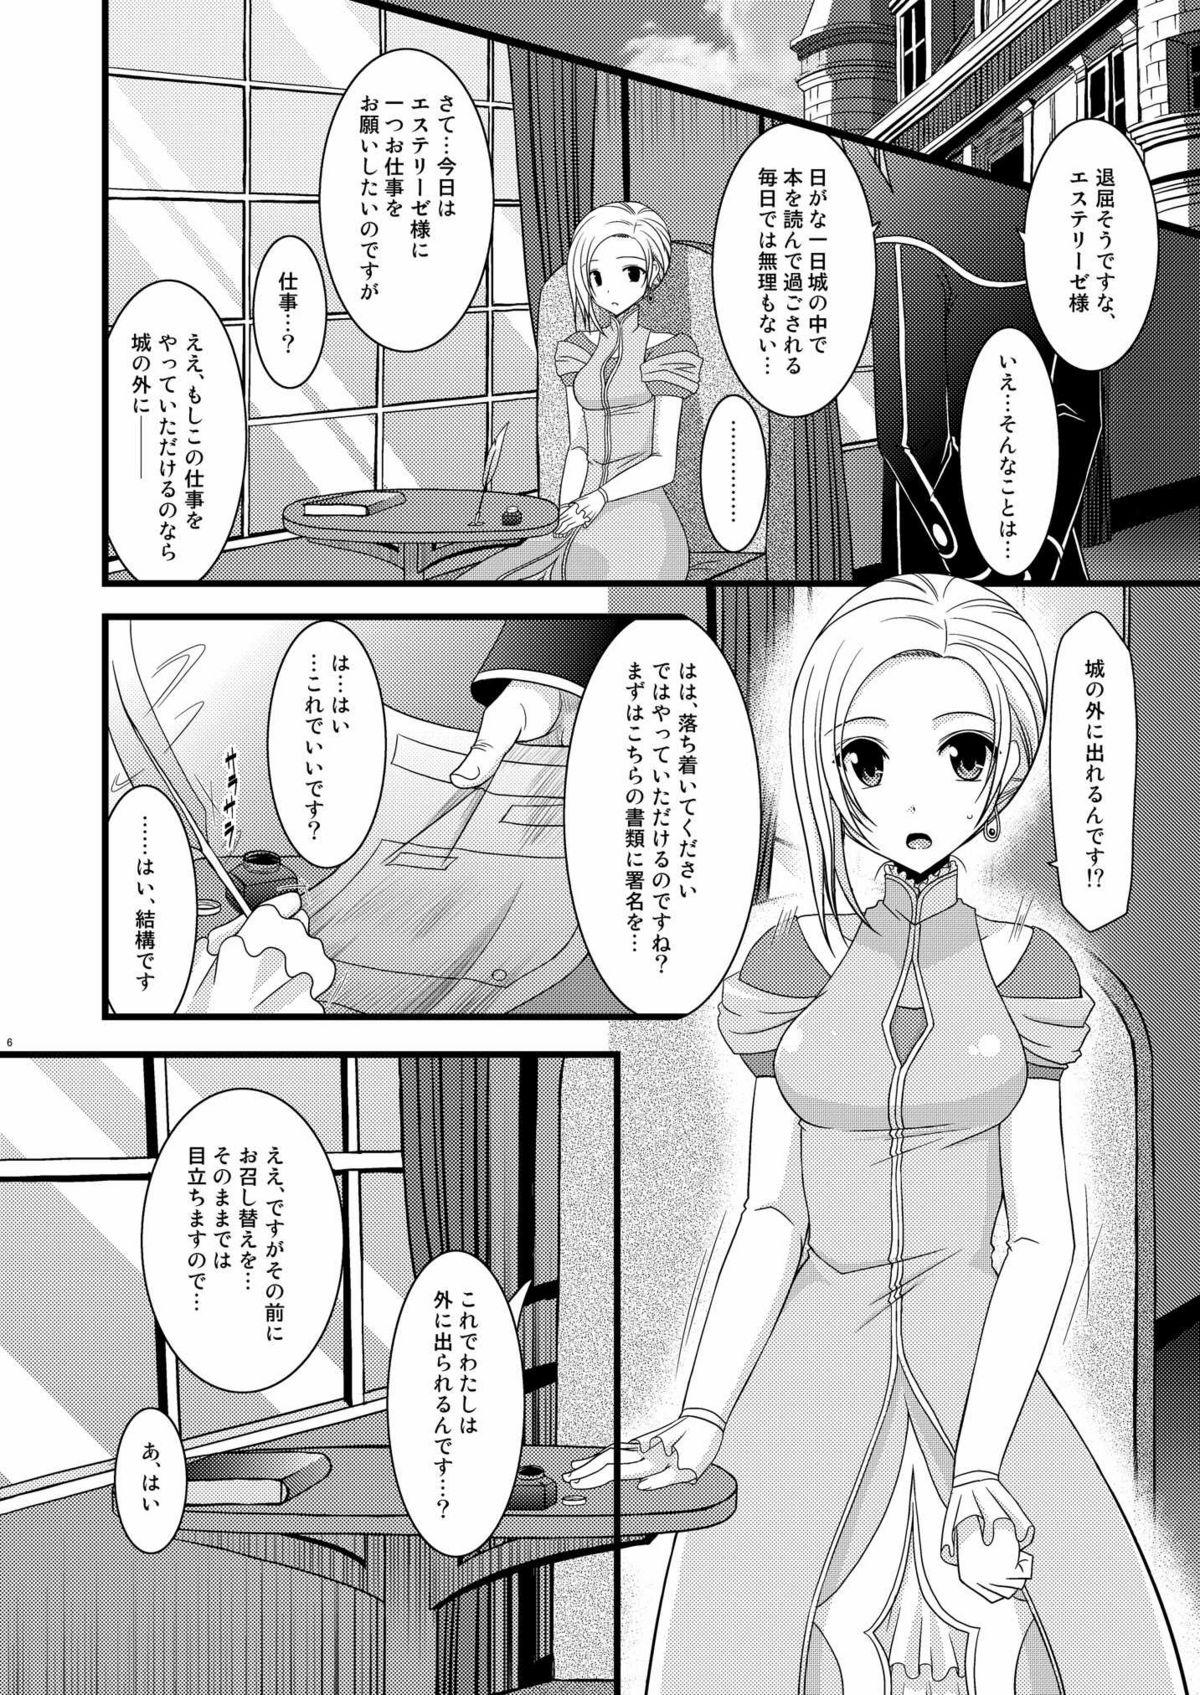 Point Of View Mangetsu San Tan - Tales of vesperia Horny - Page 6